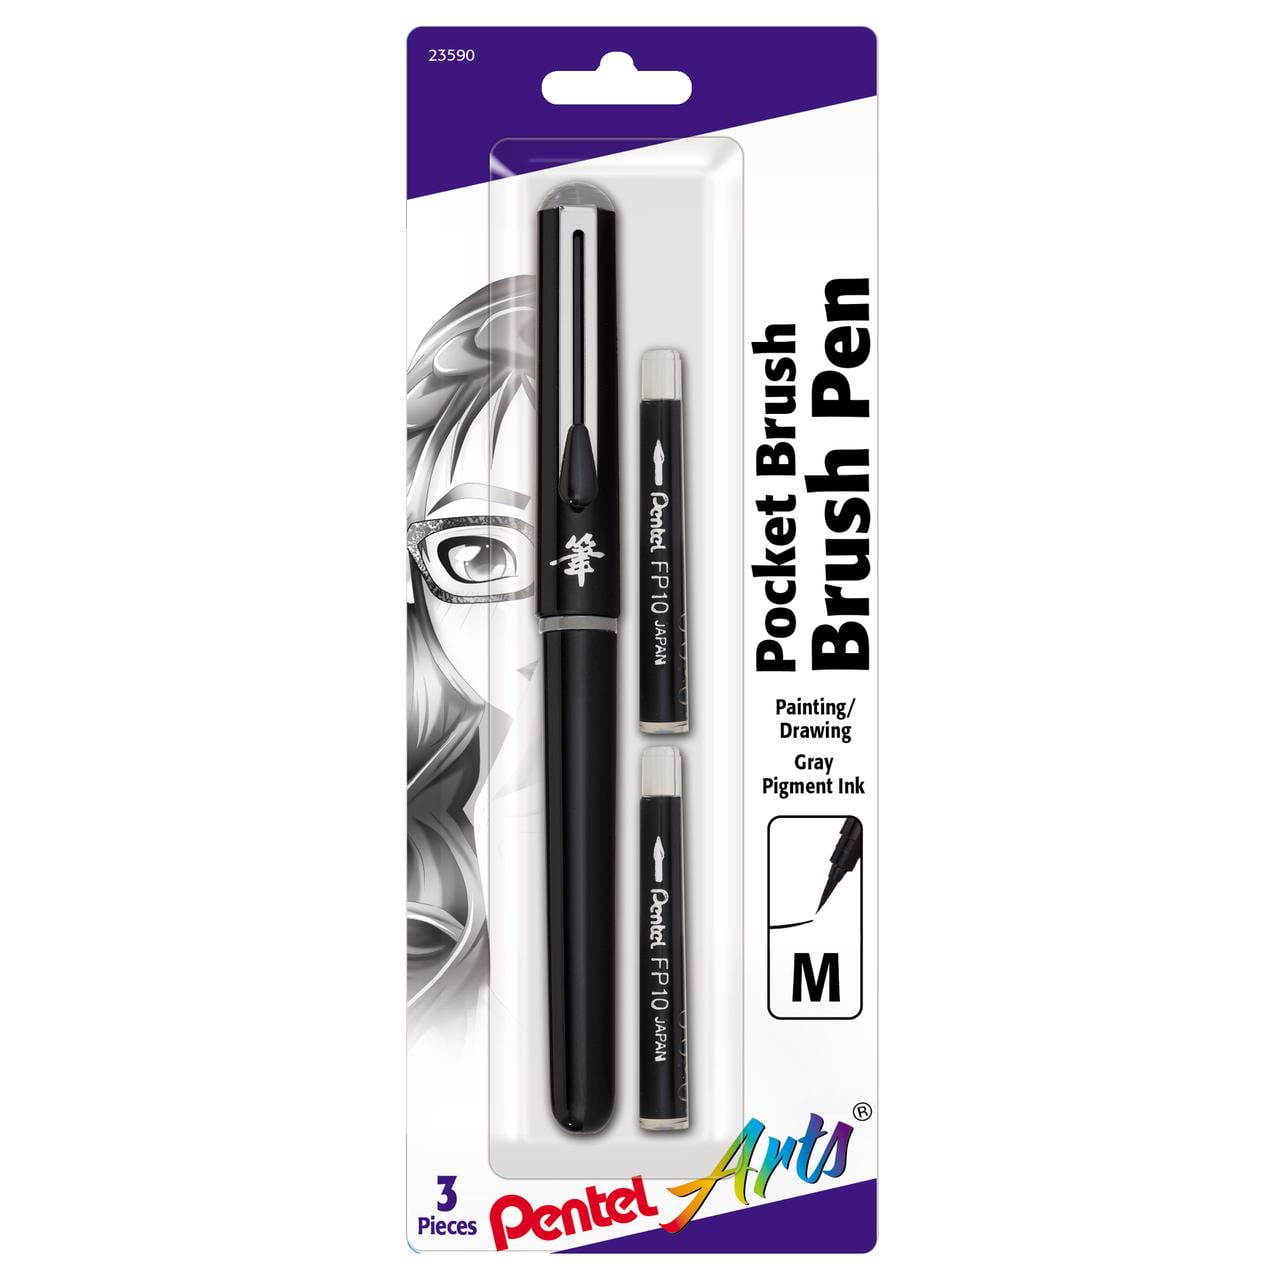 Brush Pen: Extra Thin Tip, Pigment Ink, refillable